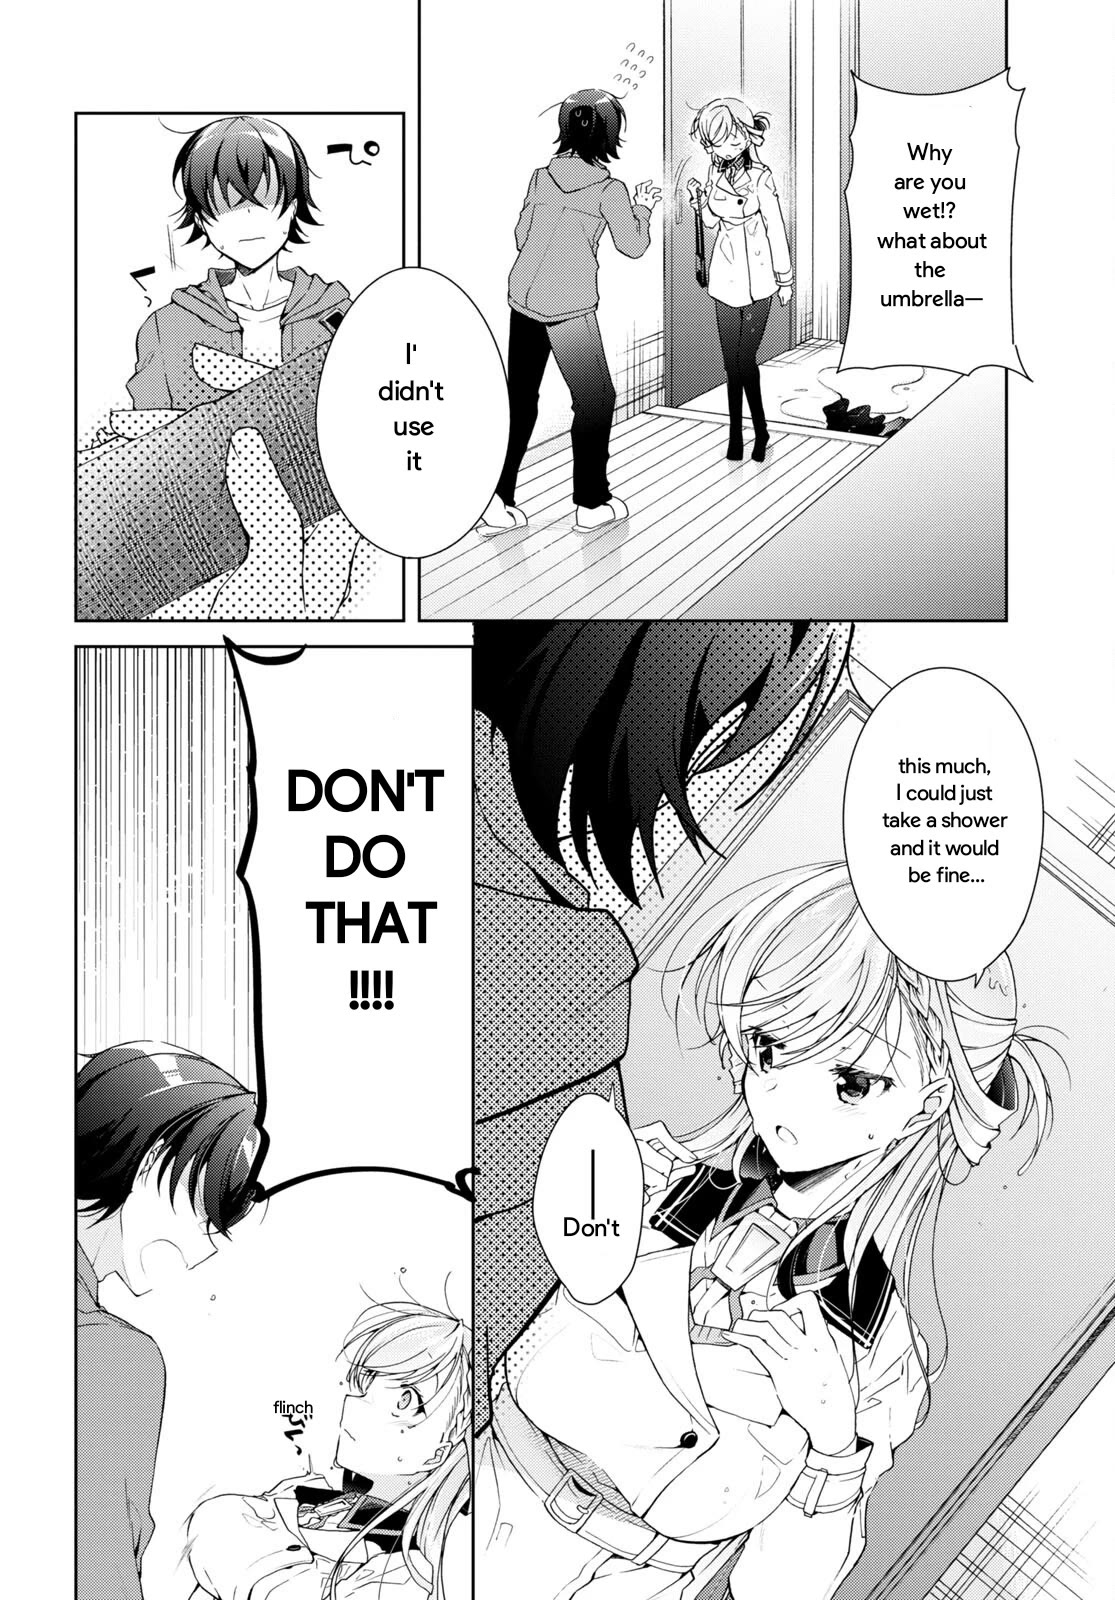 Isshiki-san Wants to Know About Love. - chapter 25 - #4